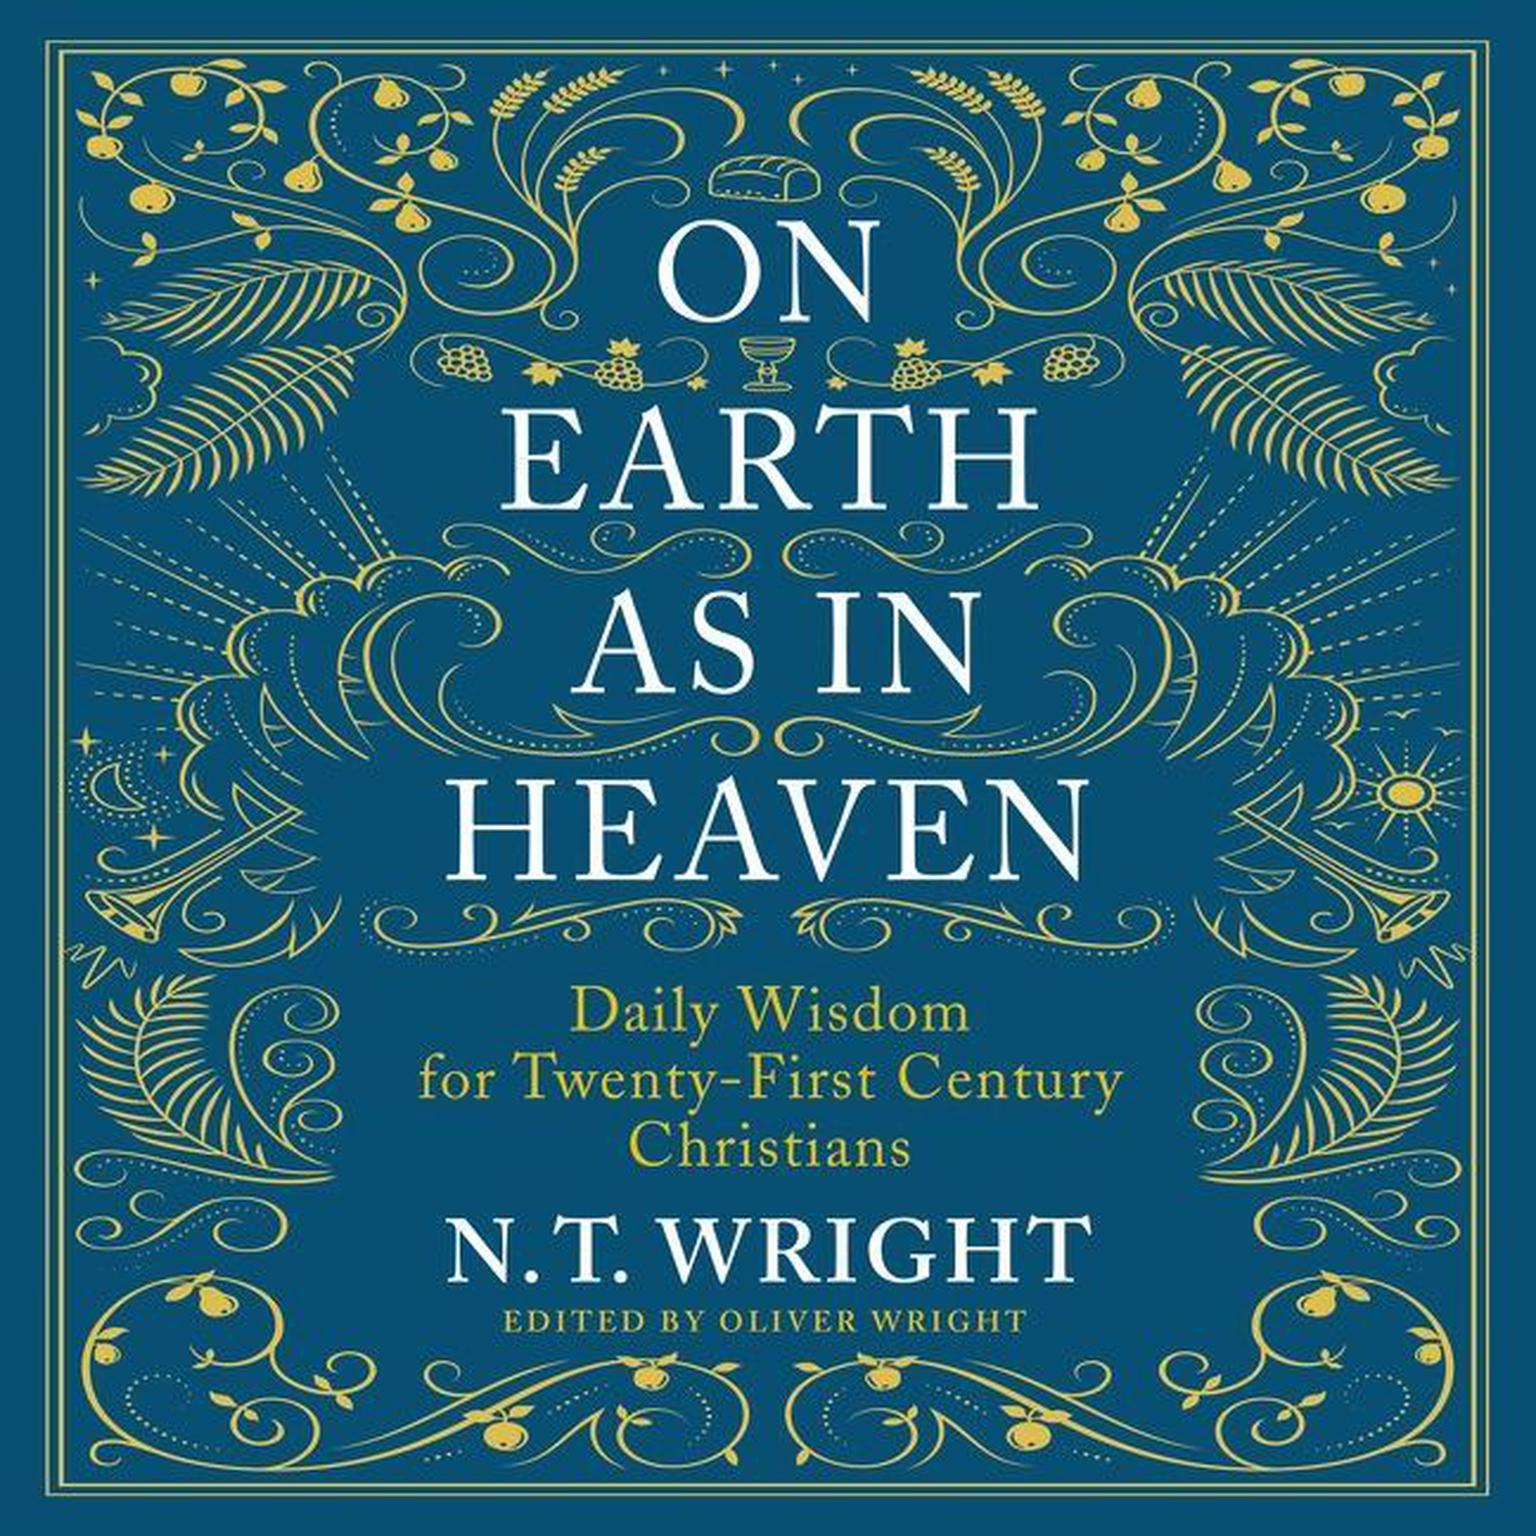 On Earth as in Heaven: Daily Wisdom for Twenty-First Century Christians Audiobook, by N. T. Wright